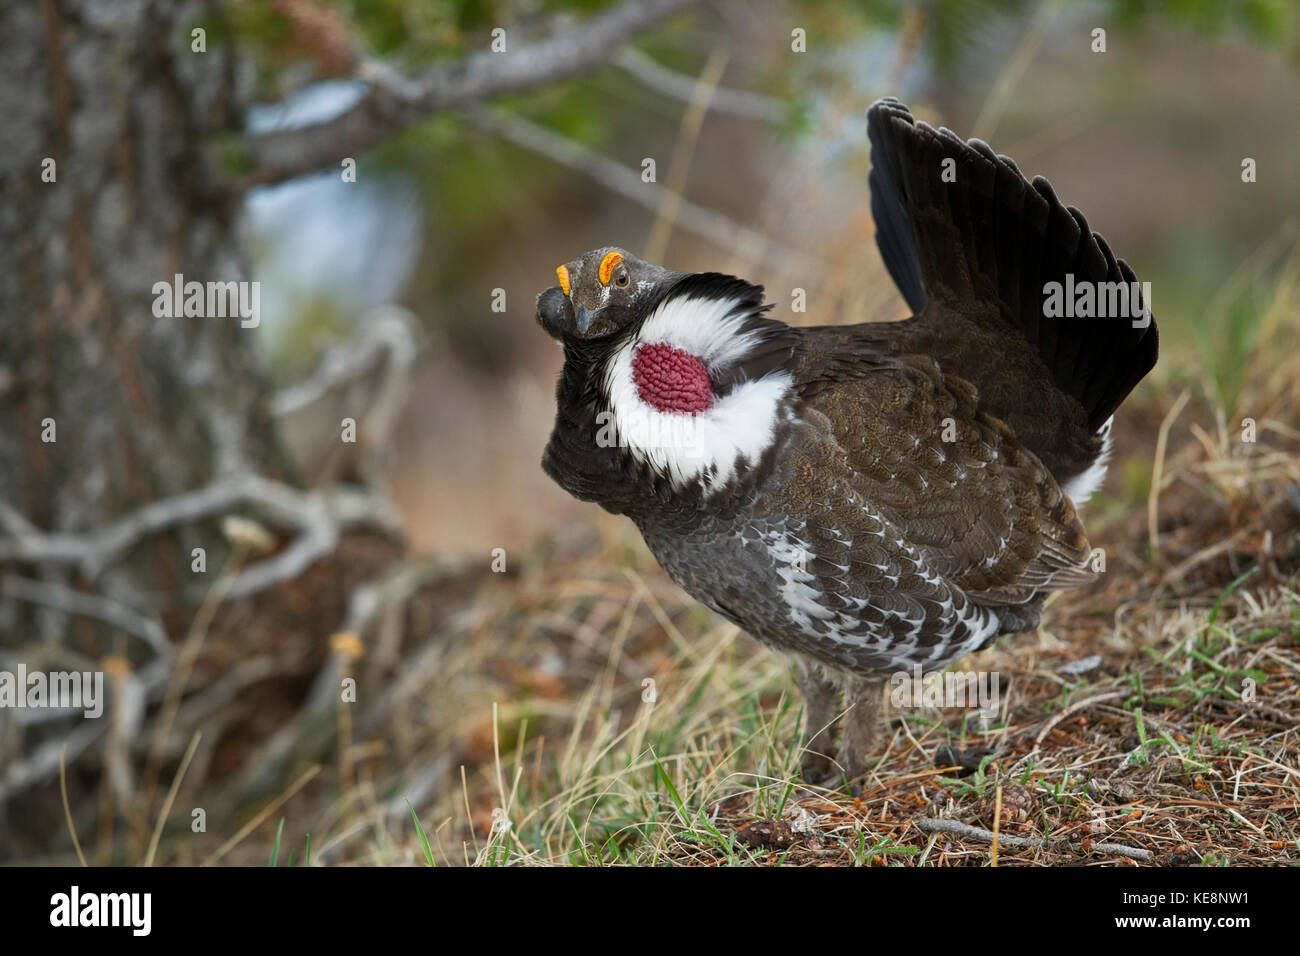 Blue or Dusky grouse during mating season in Yellowstone National Park Stock Photo